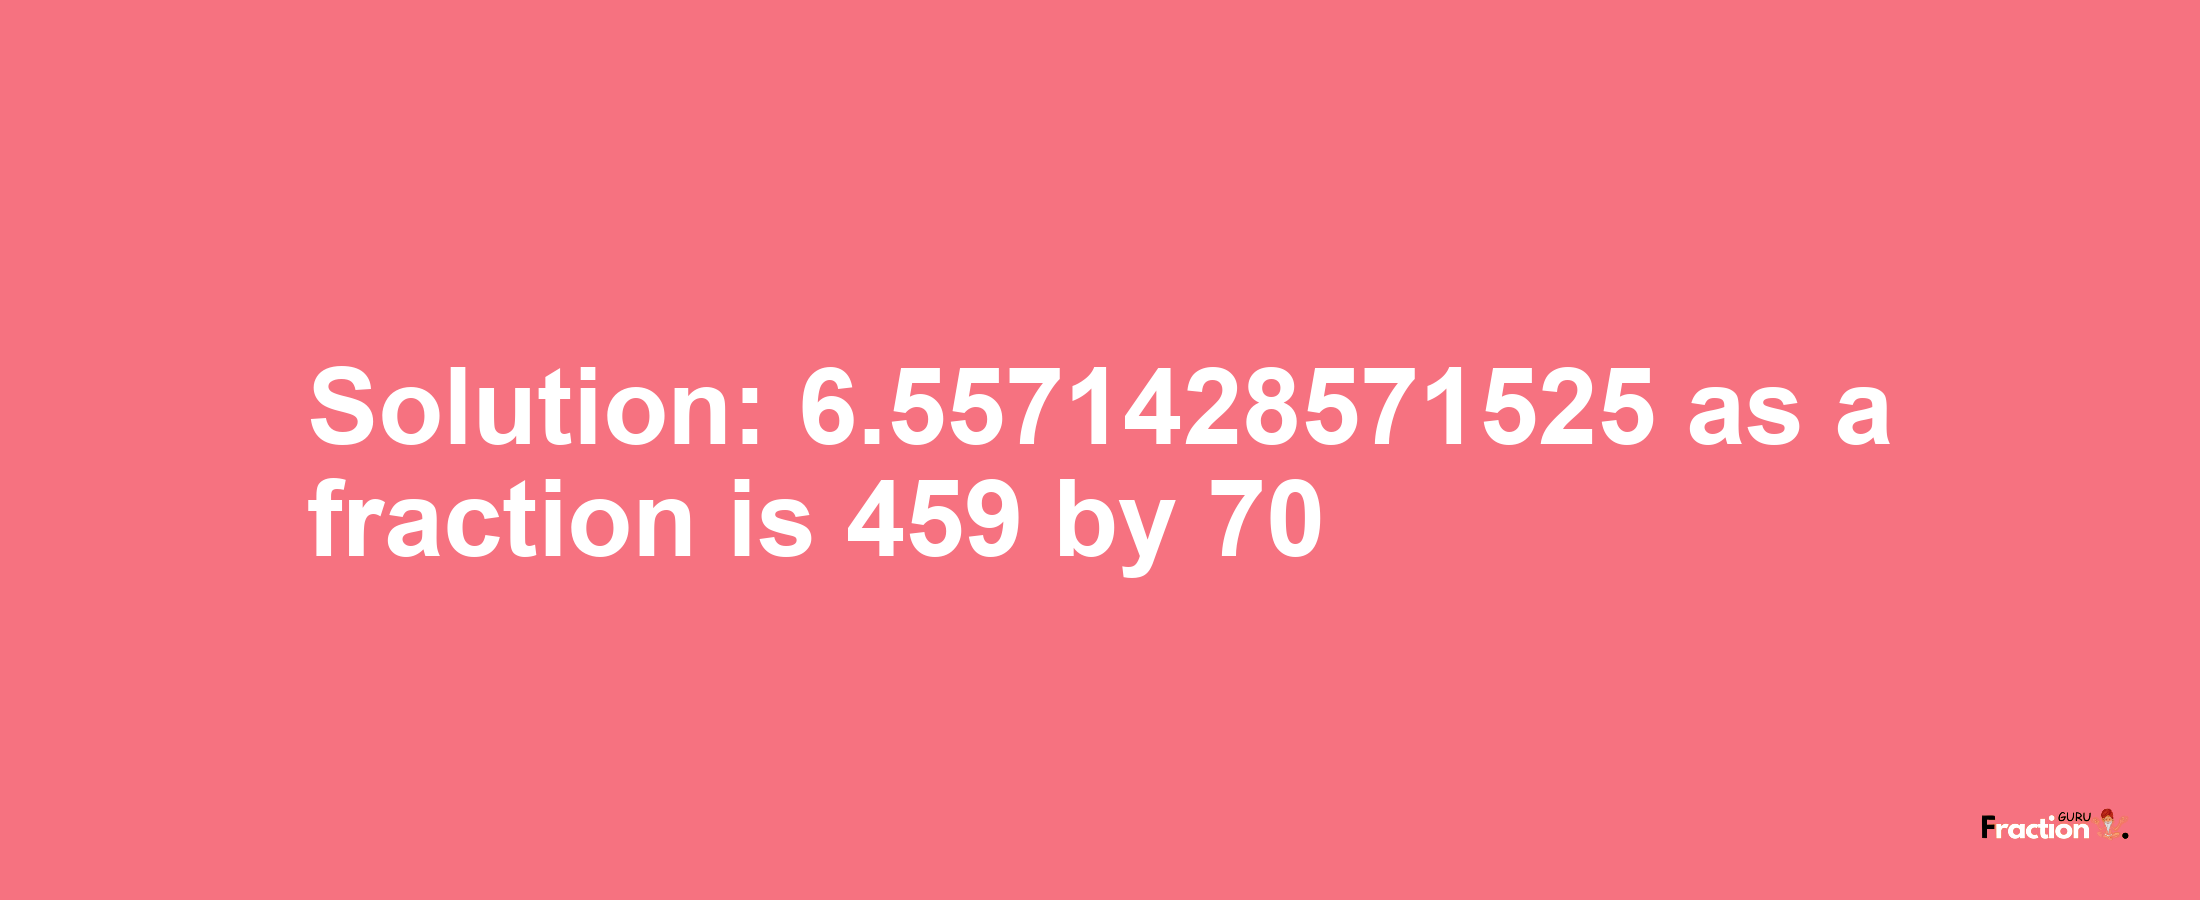 Solution:6.5571428571525 as a fraction is 459/70